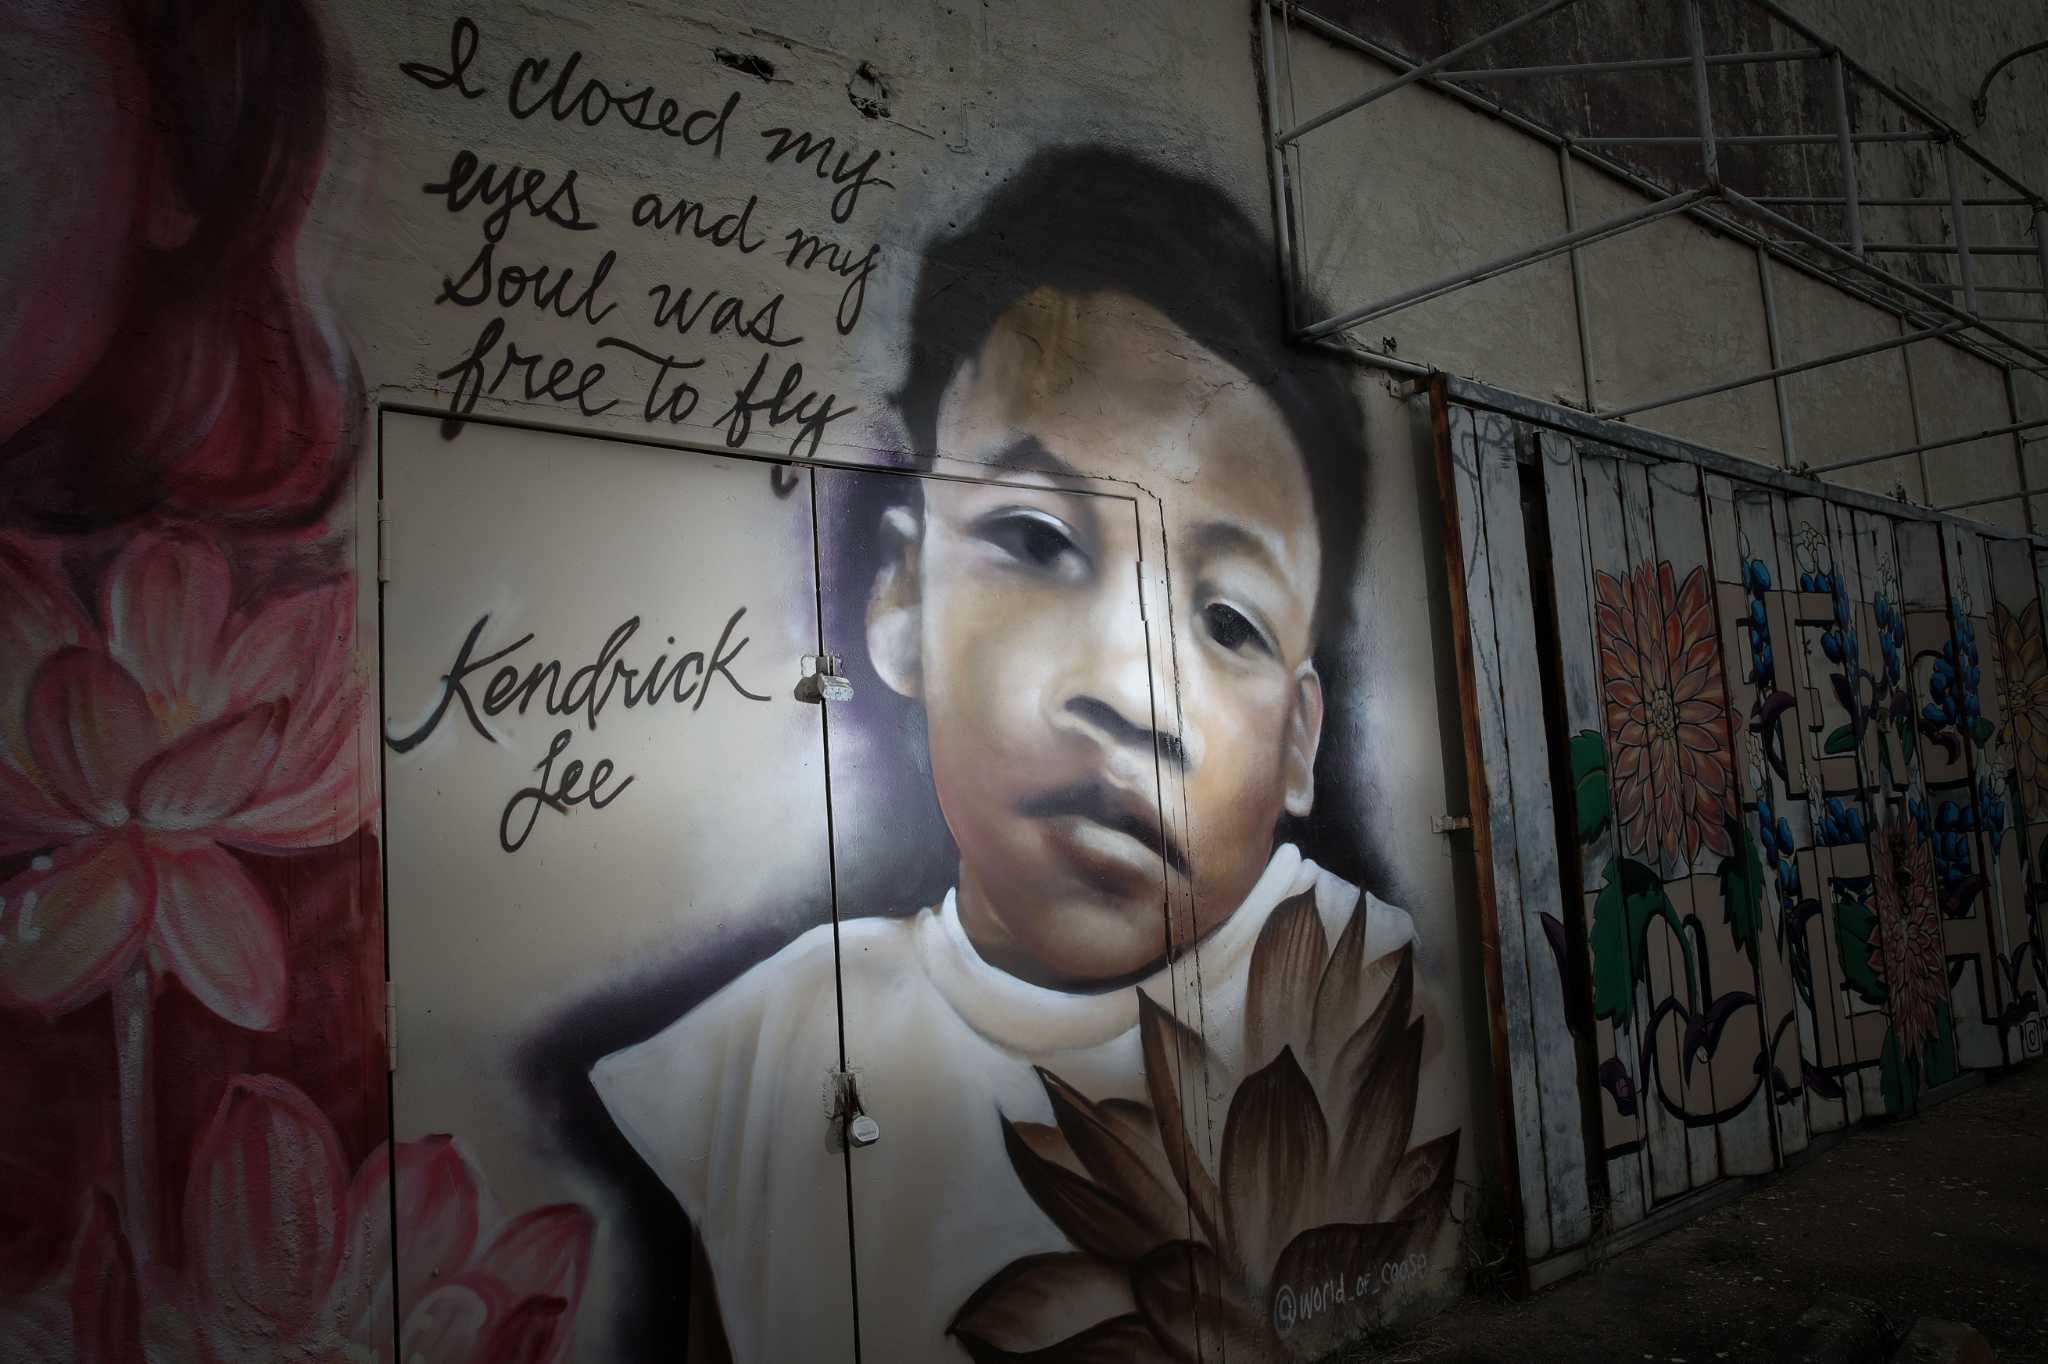 A mural shows Kendrick Lee, photographed Wednesday, Nov. 24, 2021, at the intersection of Elgin Street and Ennis Street in the Third Ward neighborhood in Houston. Officials allege that Lee was beaten to death and left in an apartment with his abandoned siblings for months.